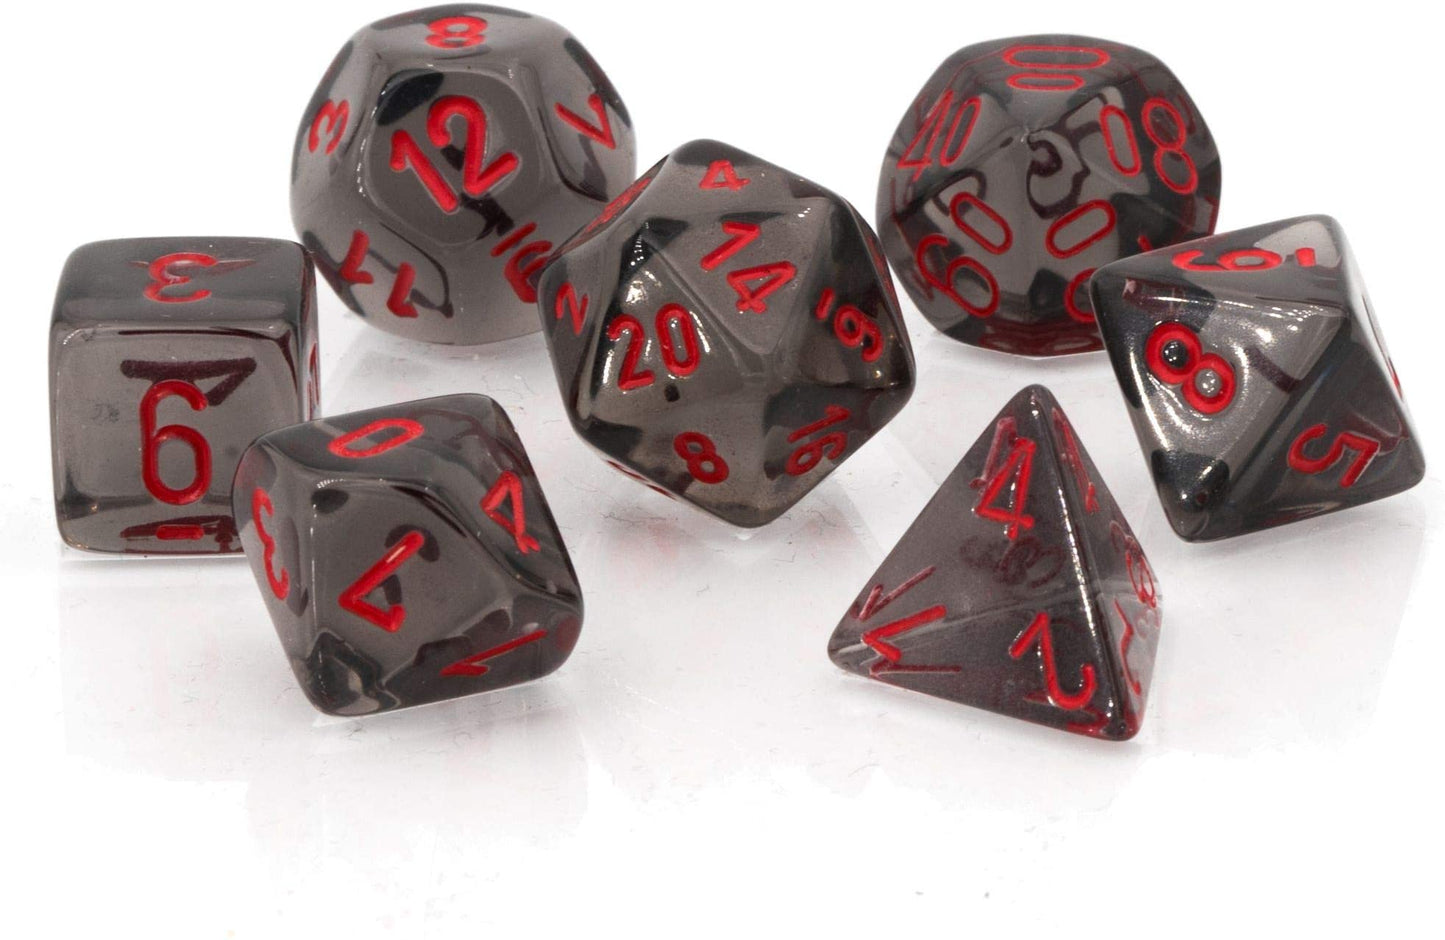 CHESSEX 7 DIE POLYHEDRAL DICE SET: TRANSLUCENT SMOKE WITH RED